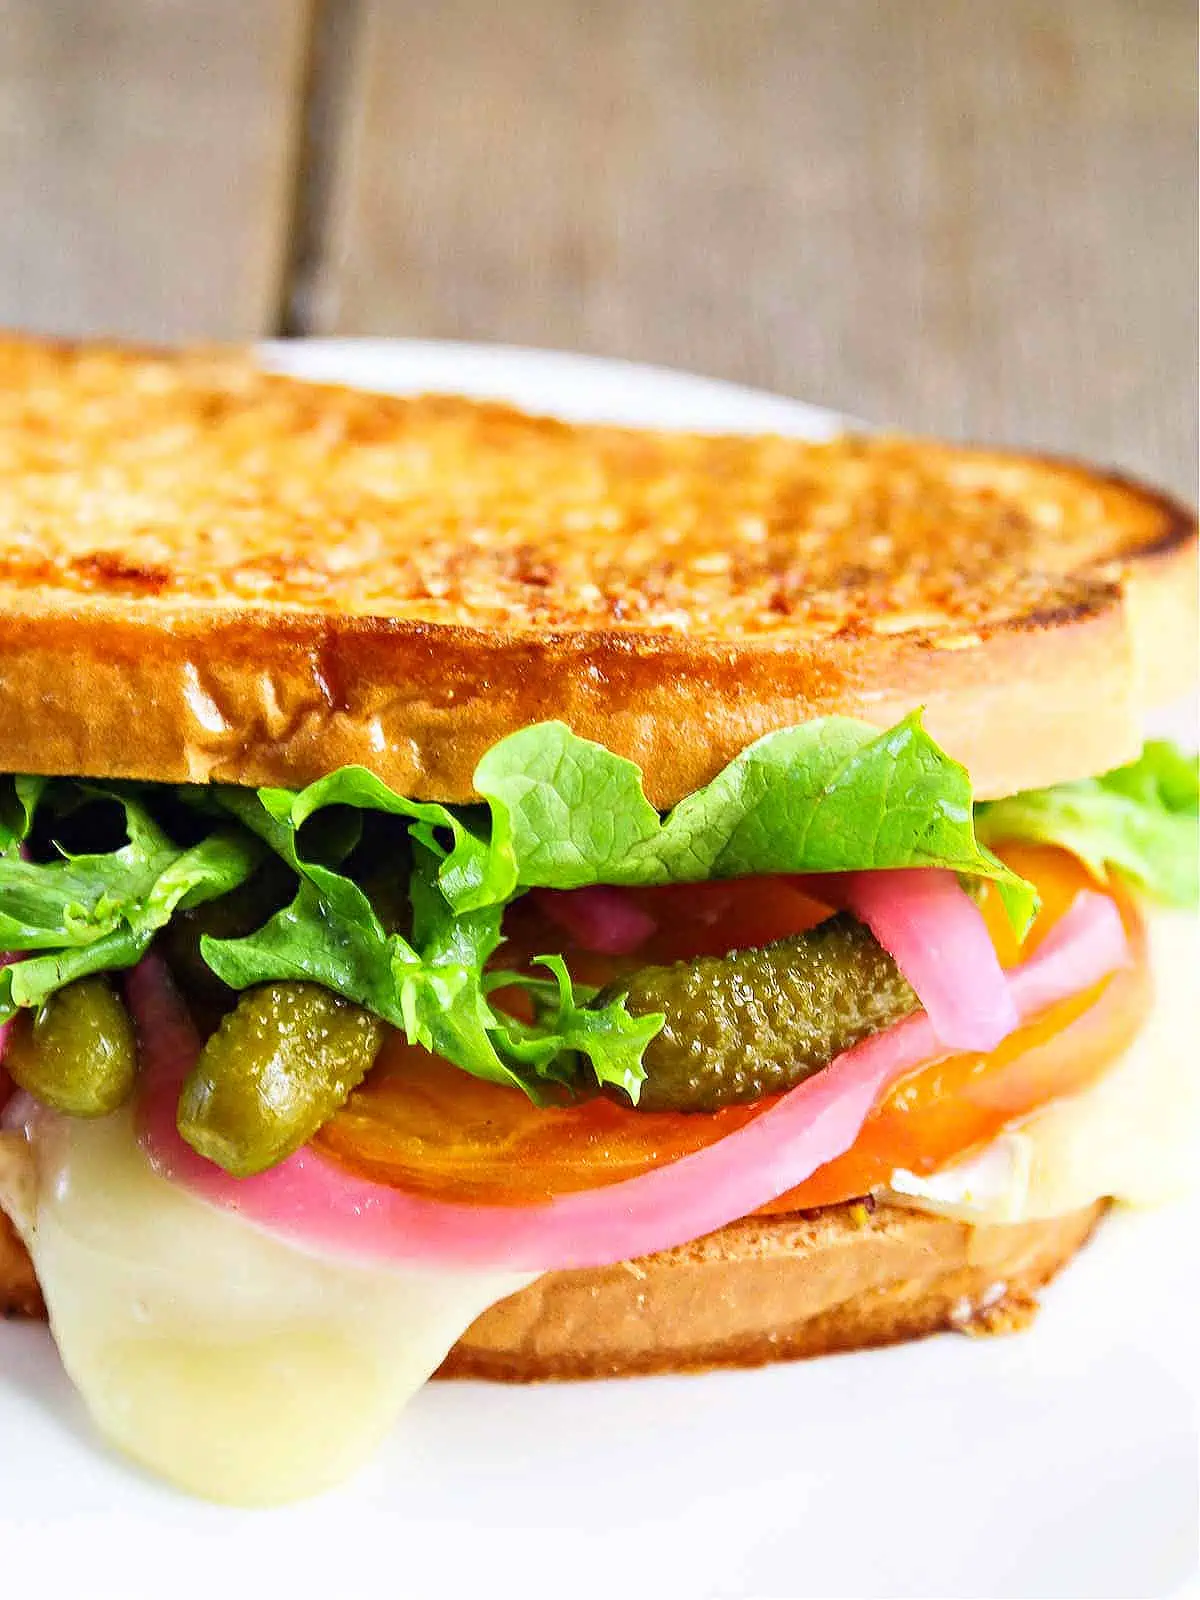 A golden brown grill cheese sandwich stuffed with cheese, cornichon pickles, red pickled onions, and lettuce.